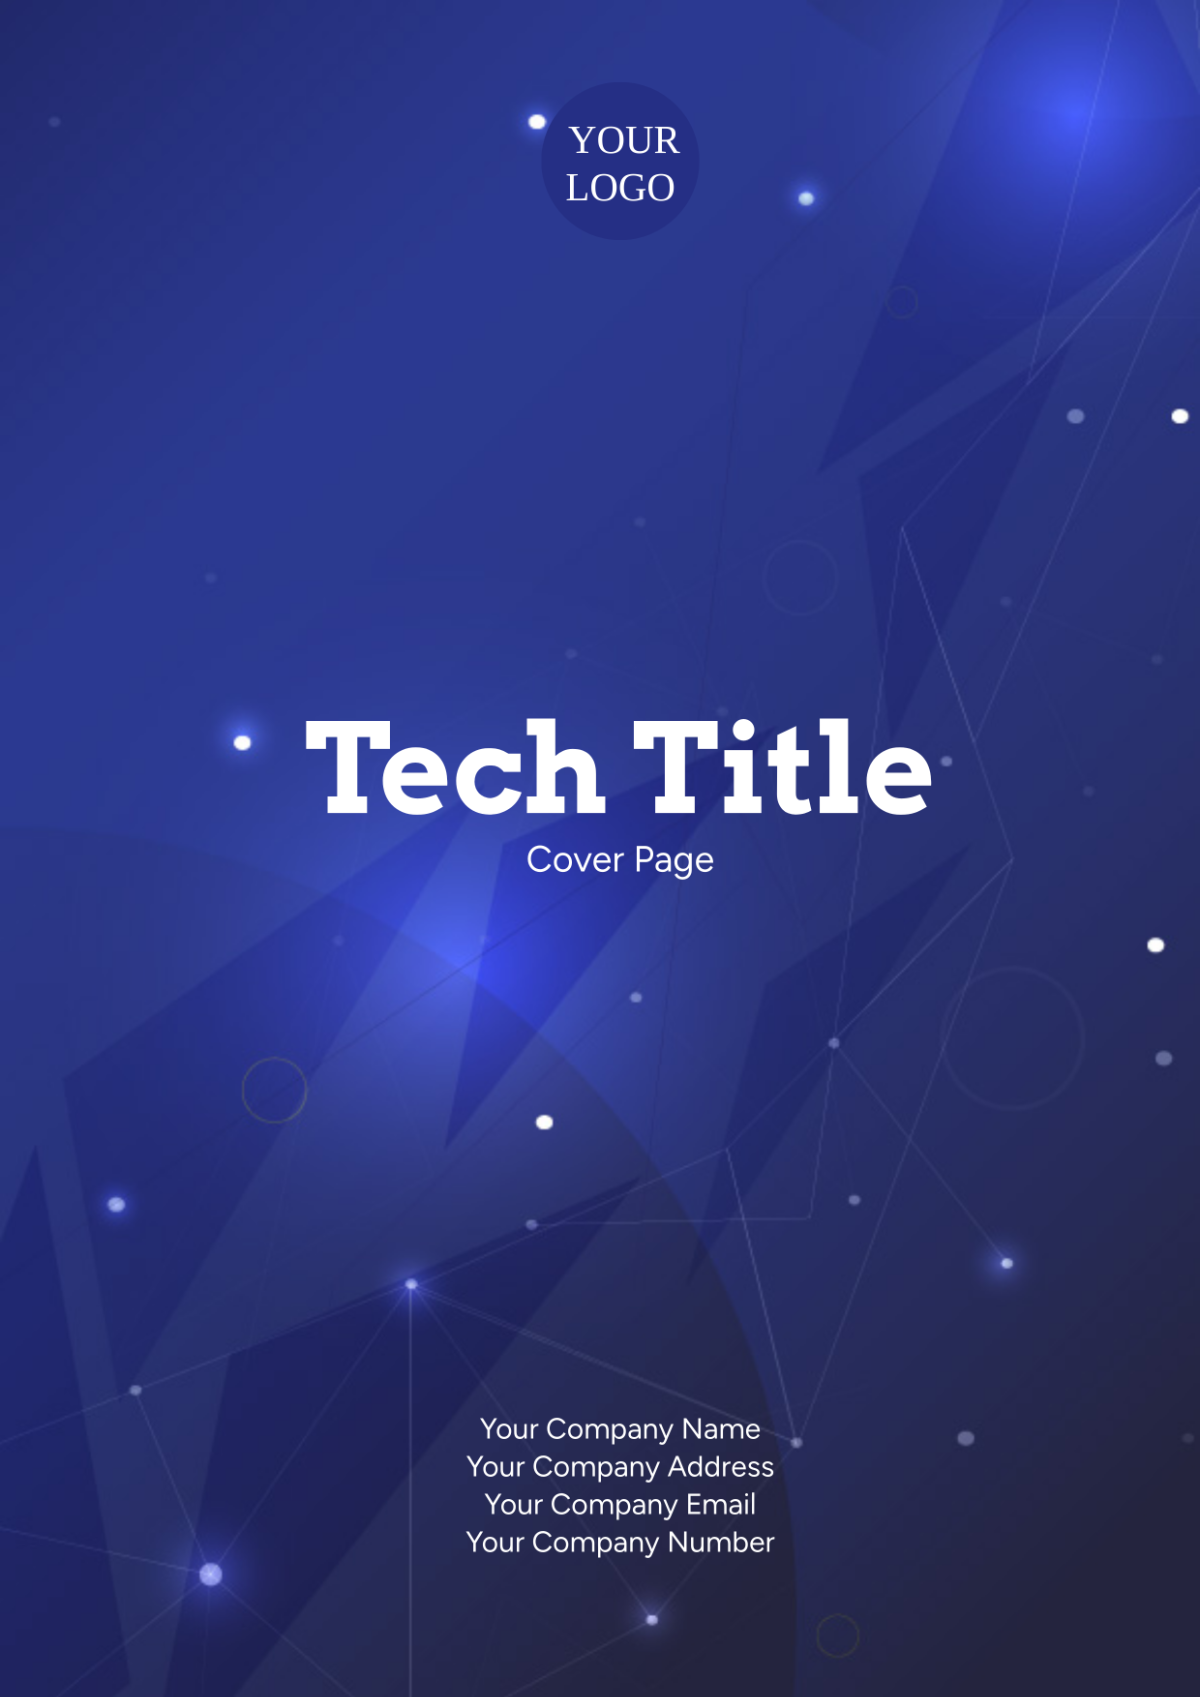 Tech Title Cover Page